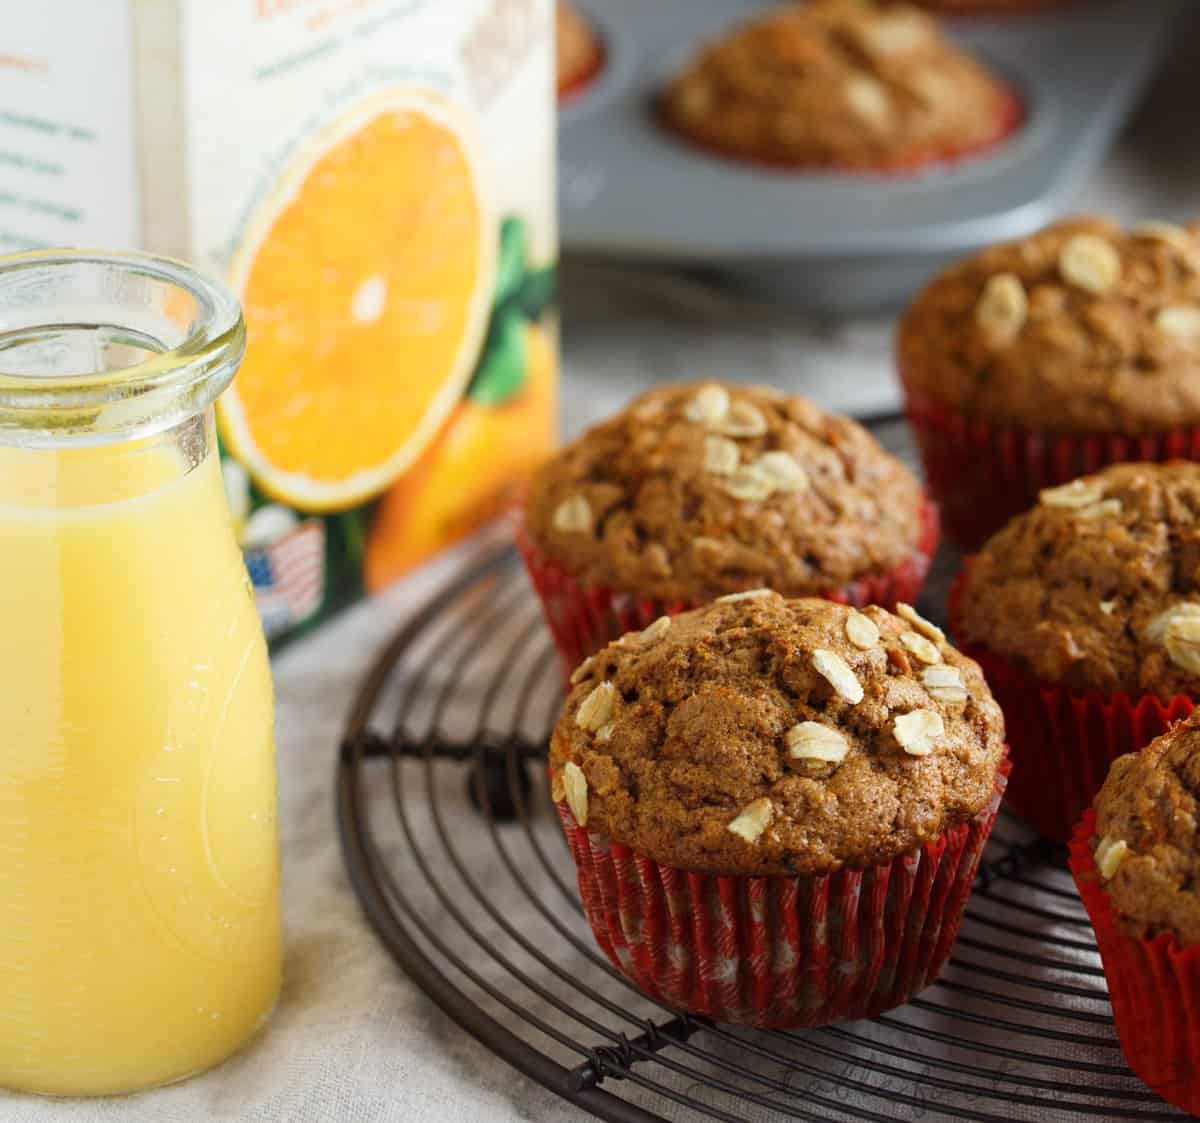 Incredibly flavorful, moist, and fluffy muffins for a quick on-the-go breakfast! Warm spices, orange and carrots make this spiced orange and carrot whole wheat muffin so tender and full of healthy goodness for your mornings!